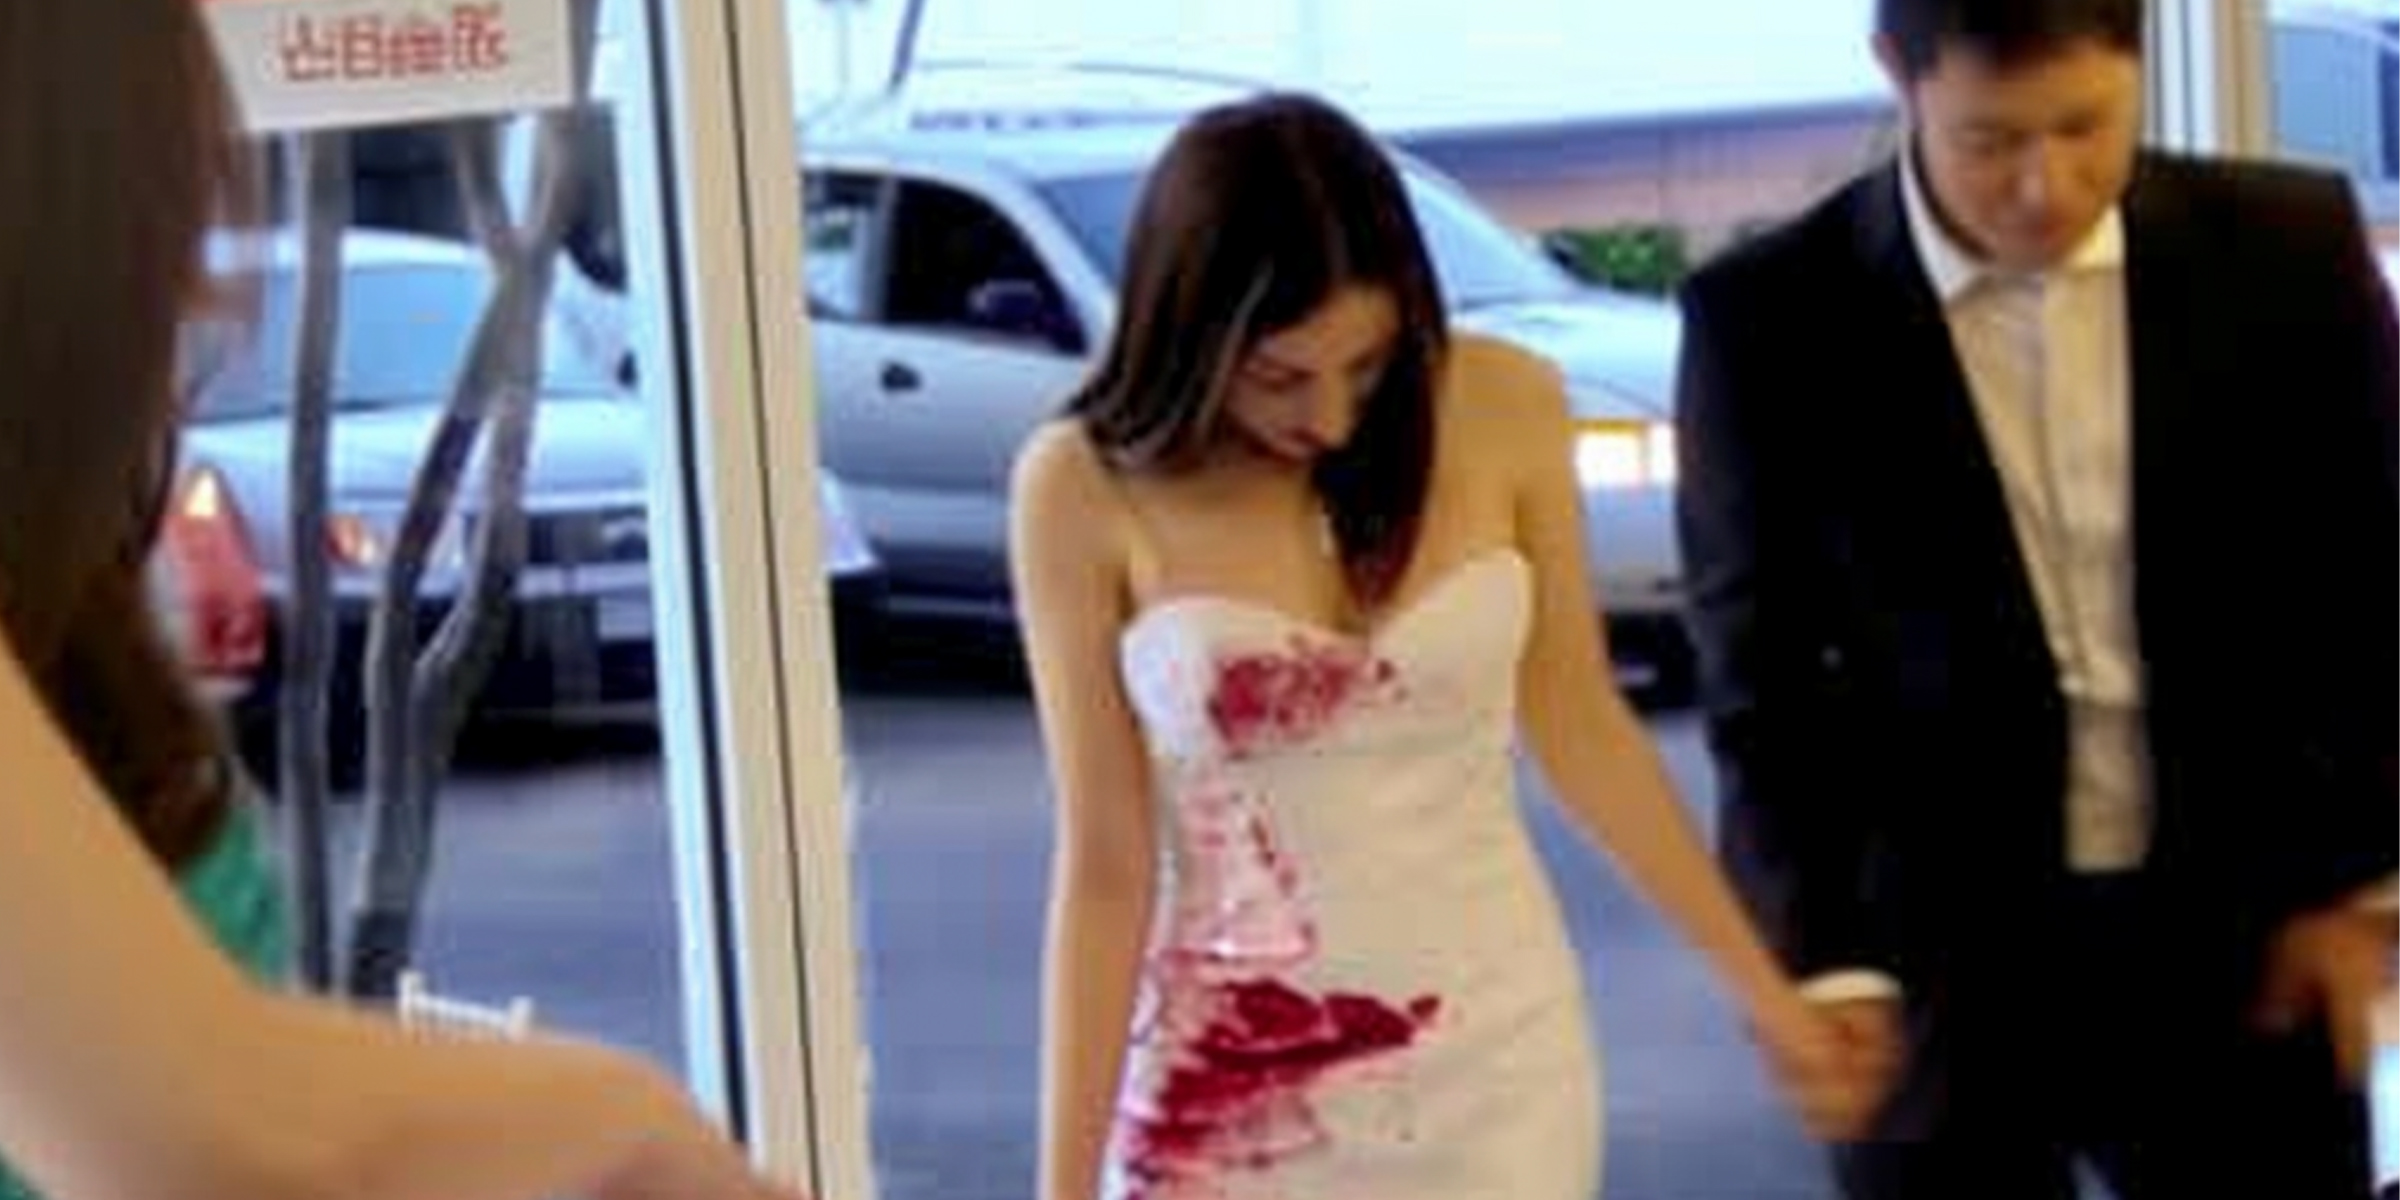 A sad bride with red paint on her dress accompanied by the groom | Source: Amomama